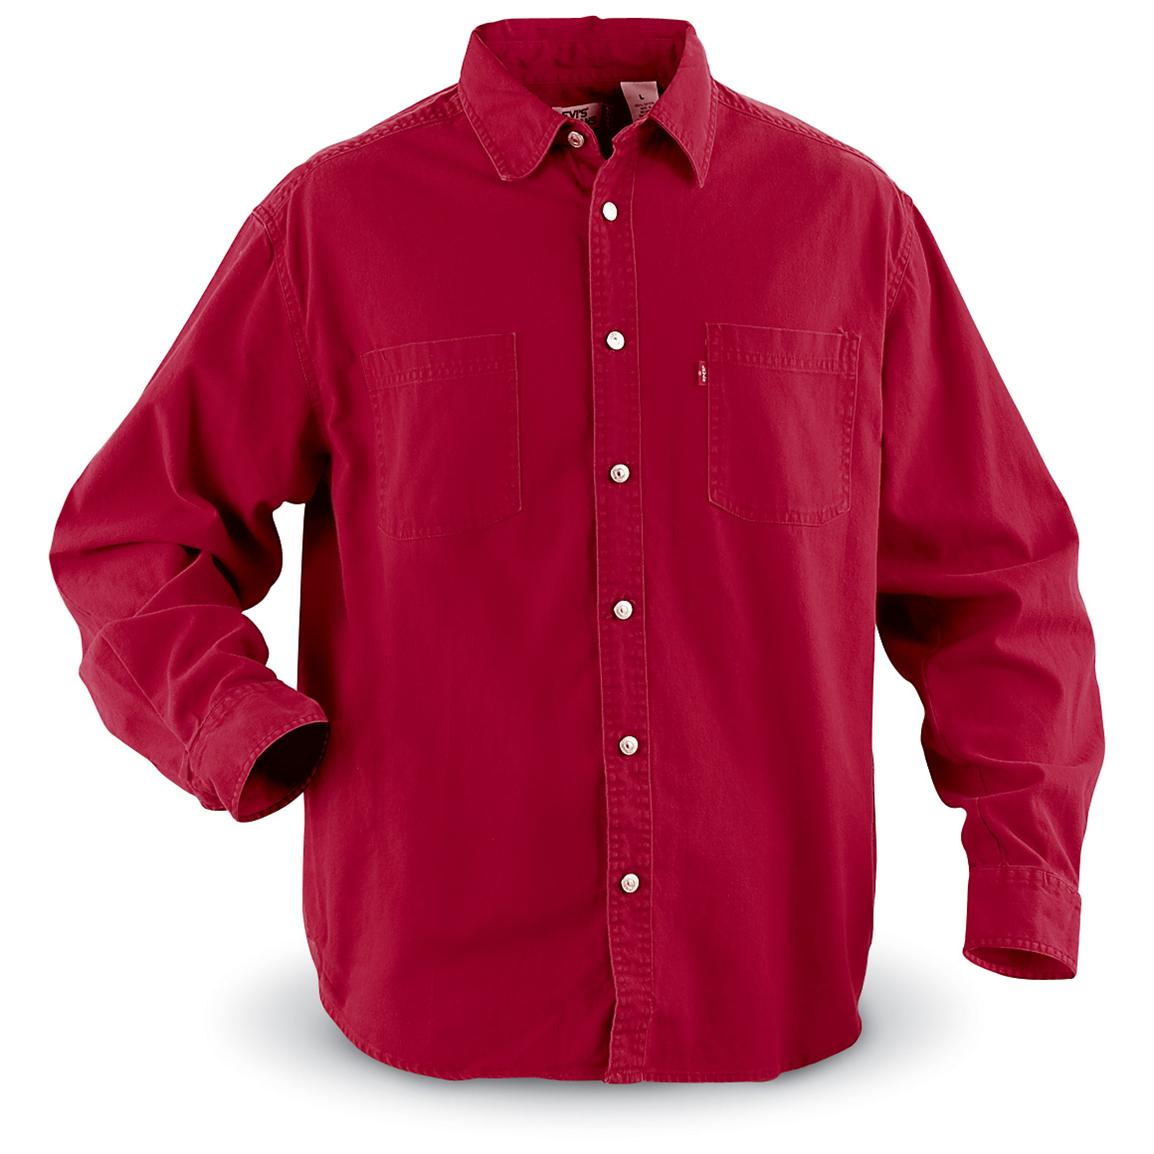 Levi's® Colored Denim Shirt - 126751, Shirts at Sportsman's Guide